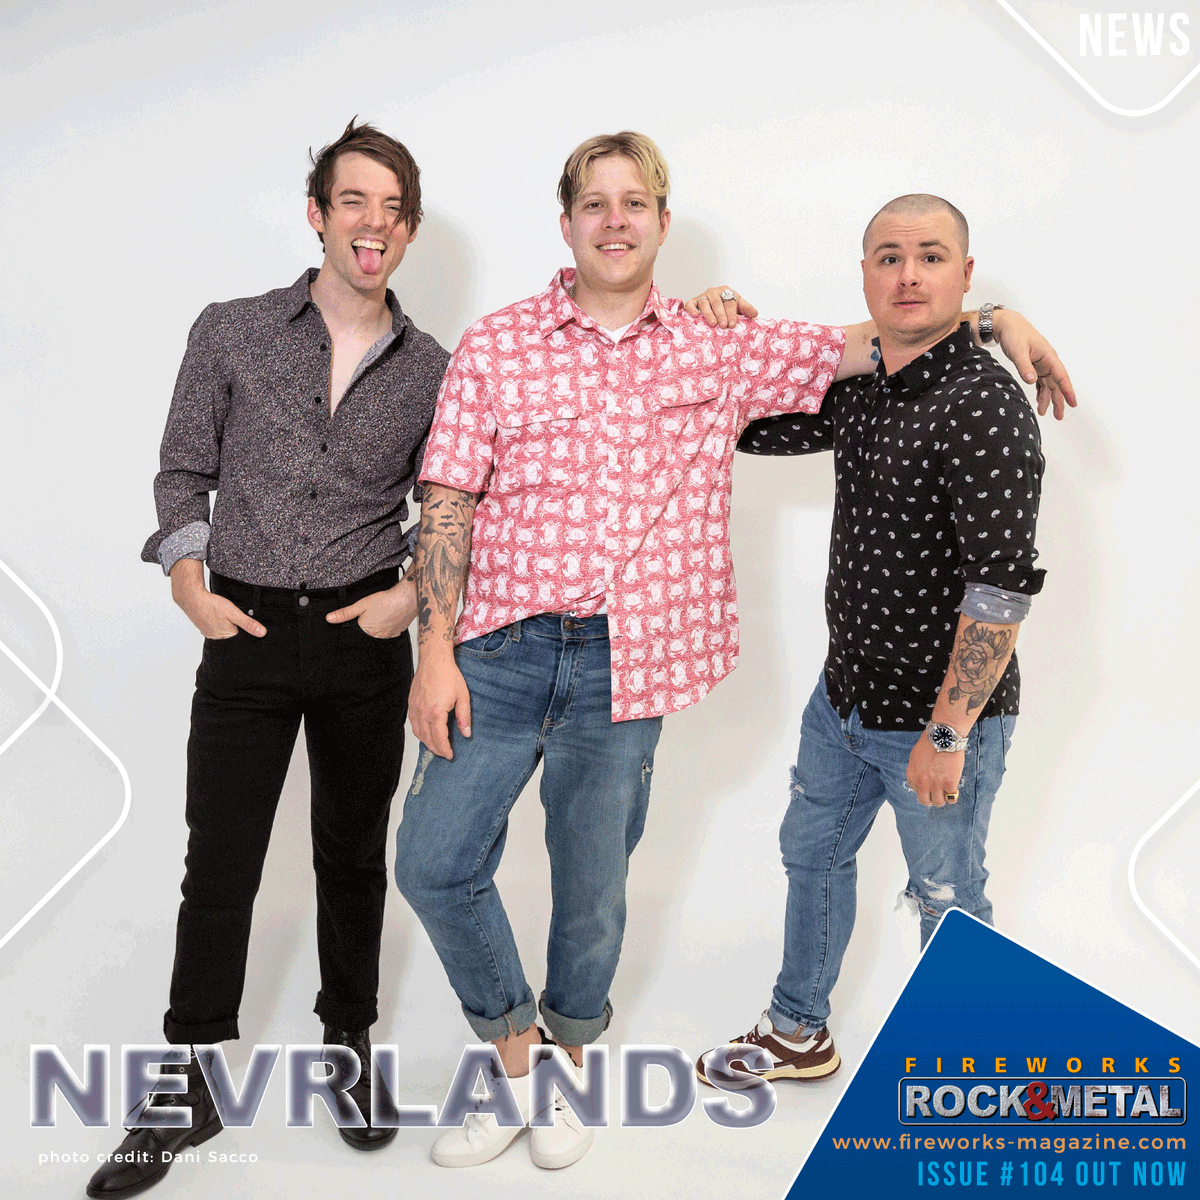 LISTEN UP! NEVRLANDS - Release Debut Full-Length LP ‘TIMELESS’.

wix.to/vSUvGUJ

@nevrlandsband @duffpress

--

Issue #104 is out NOW. Order it from fireworks-magazine.com or buy from WH Smiths / McColl's.

#rock #metal #rockmusic #metalmusic #nevrlands #duffpress